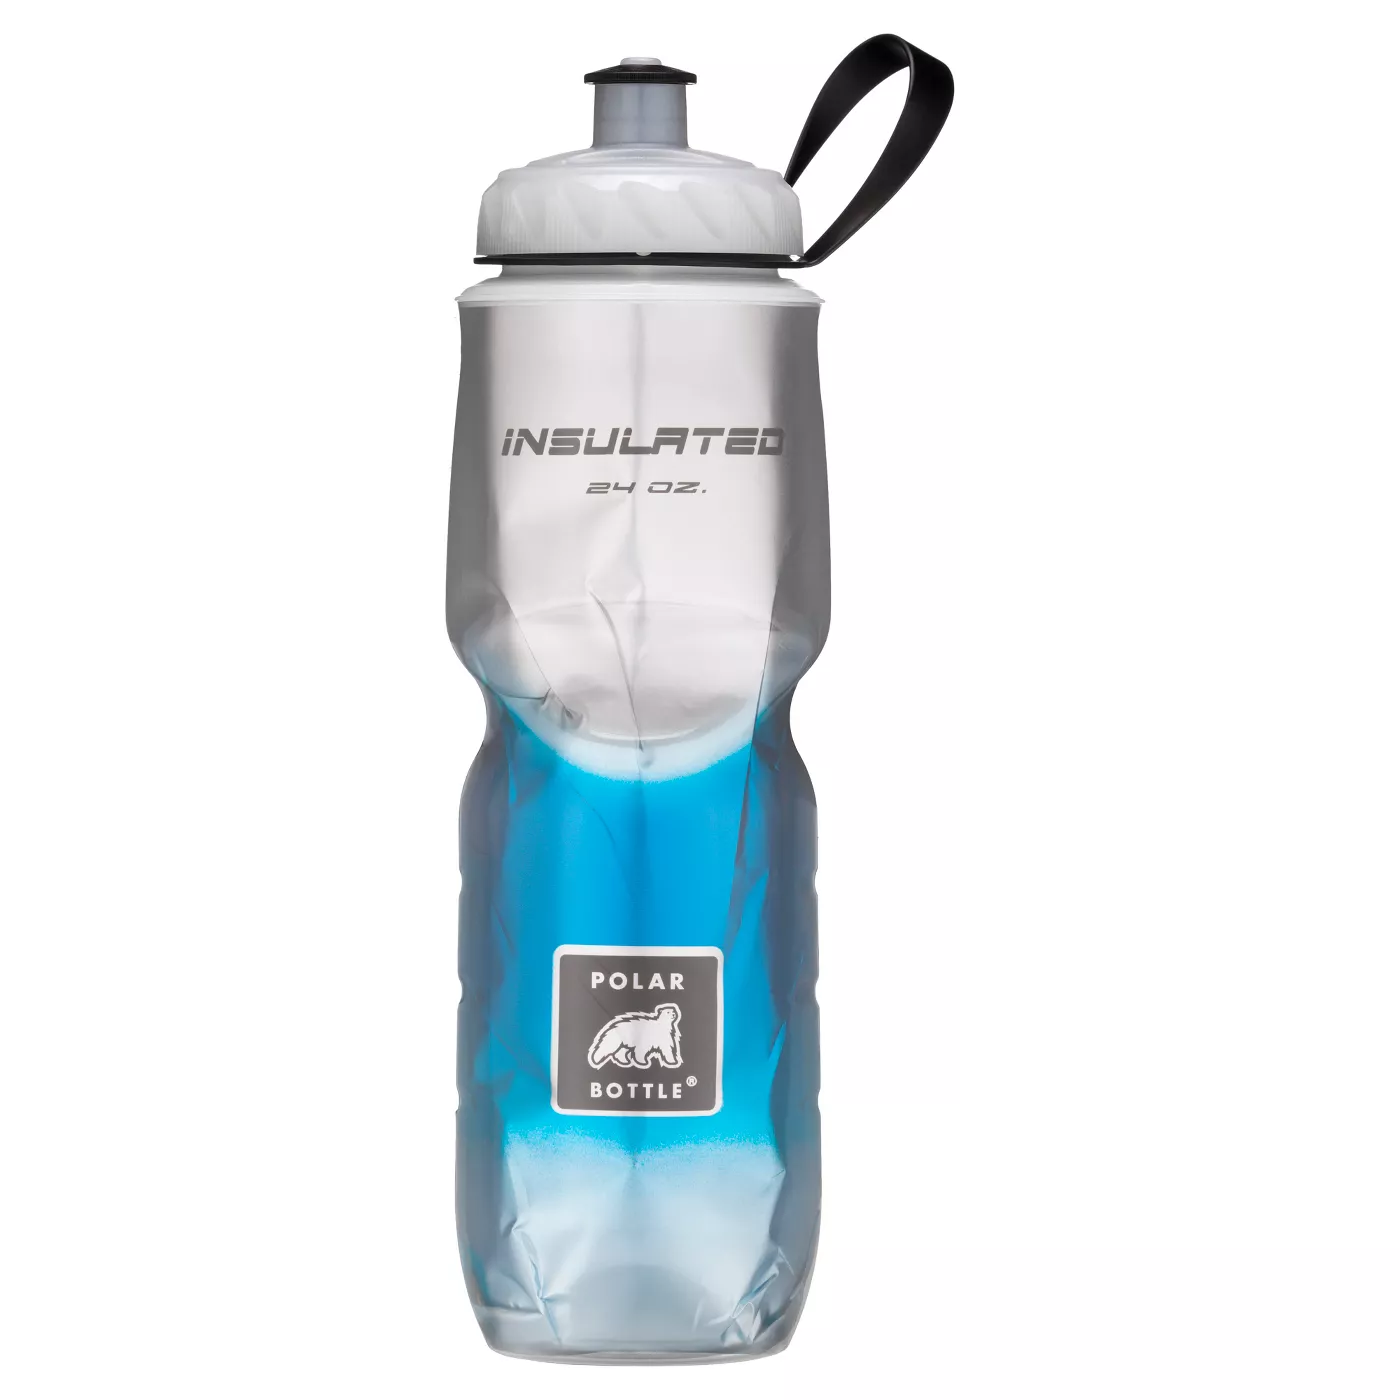 Polar 24oz Insulated Water Bottle - Blue/Silver - image 1 of 1